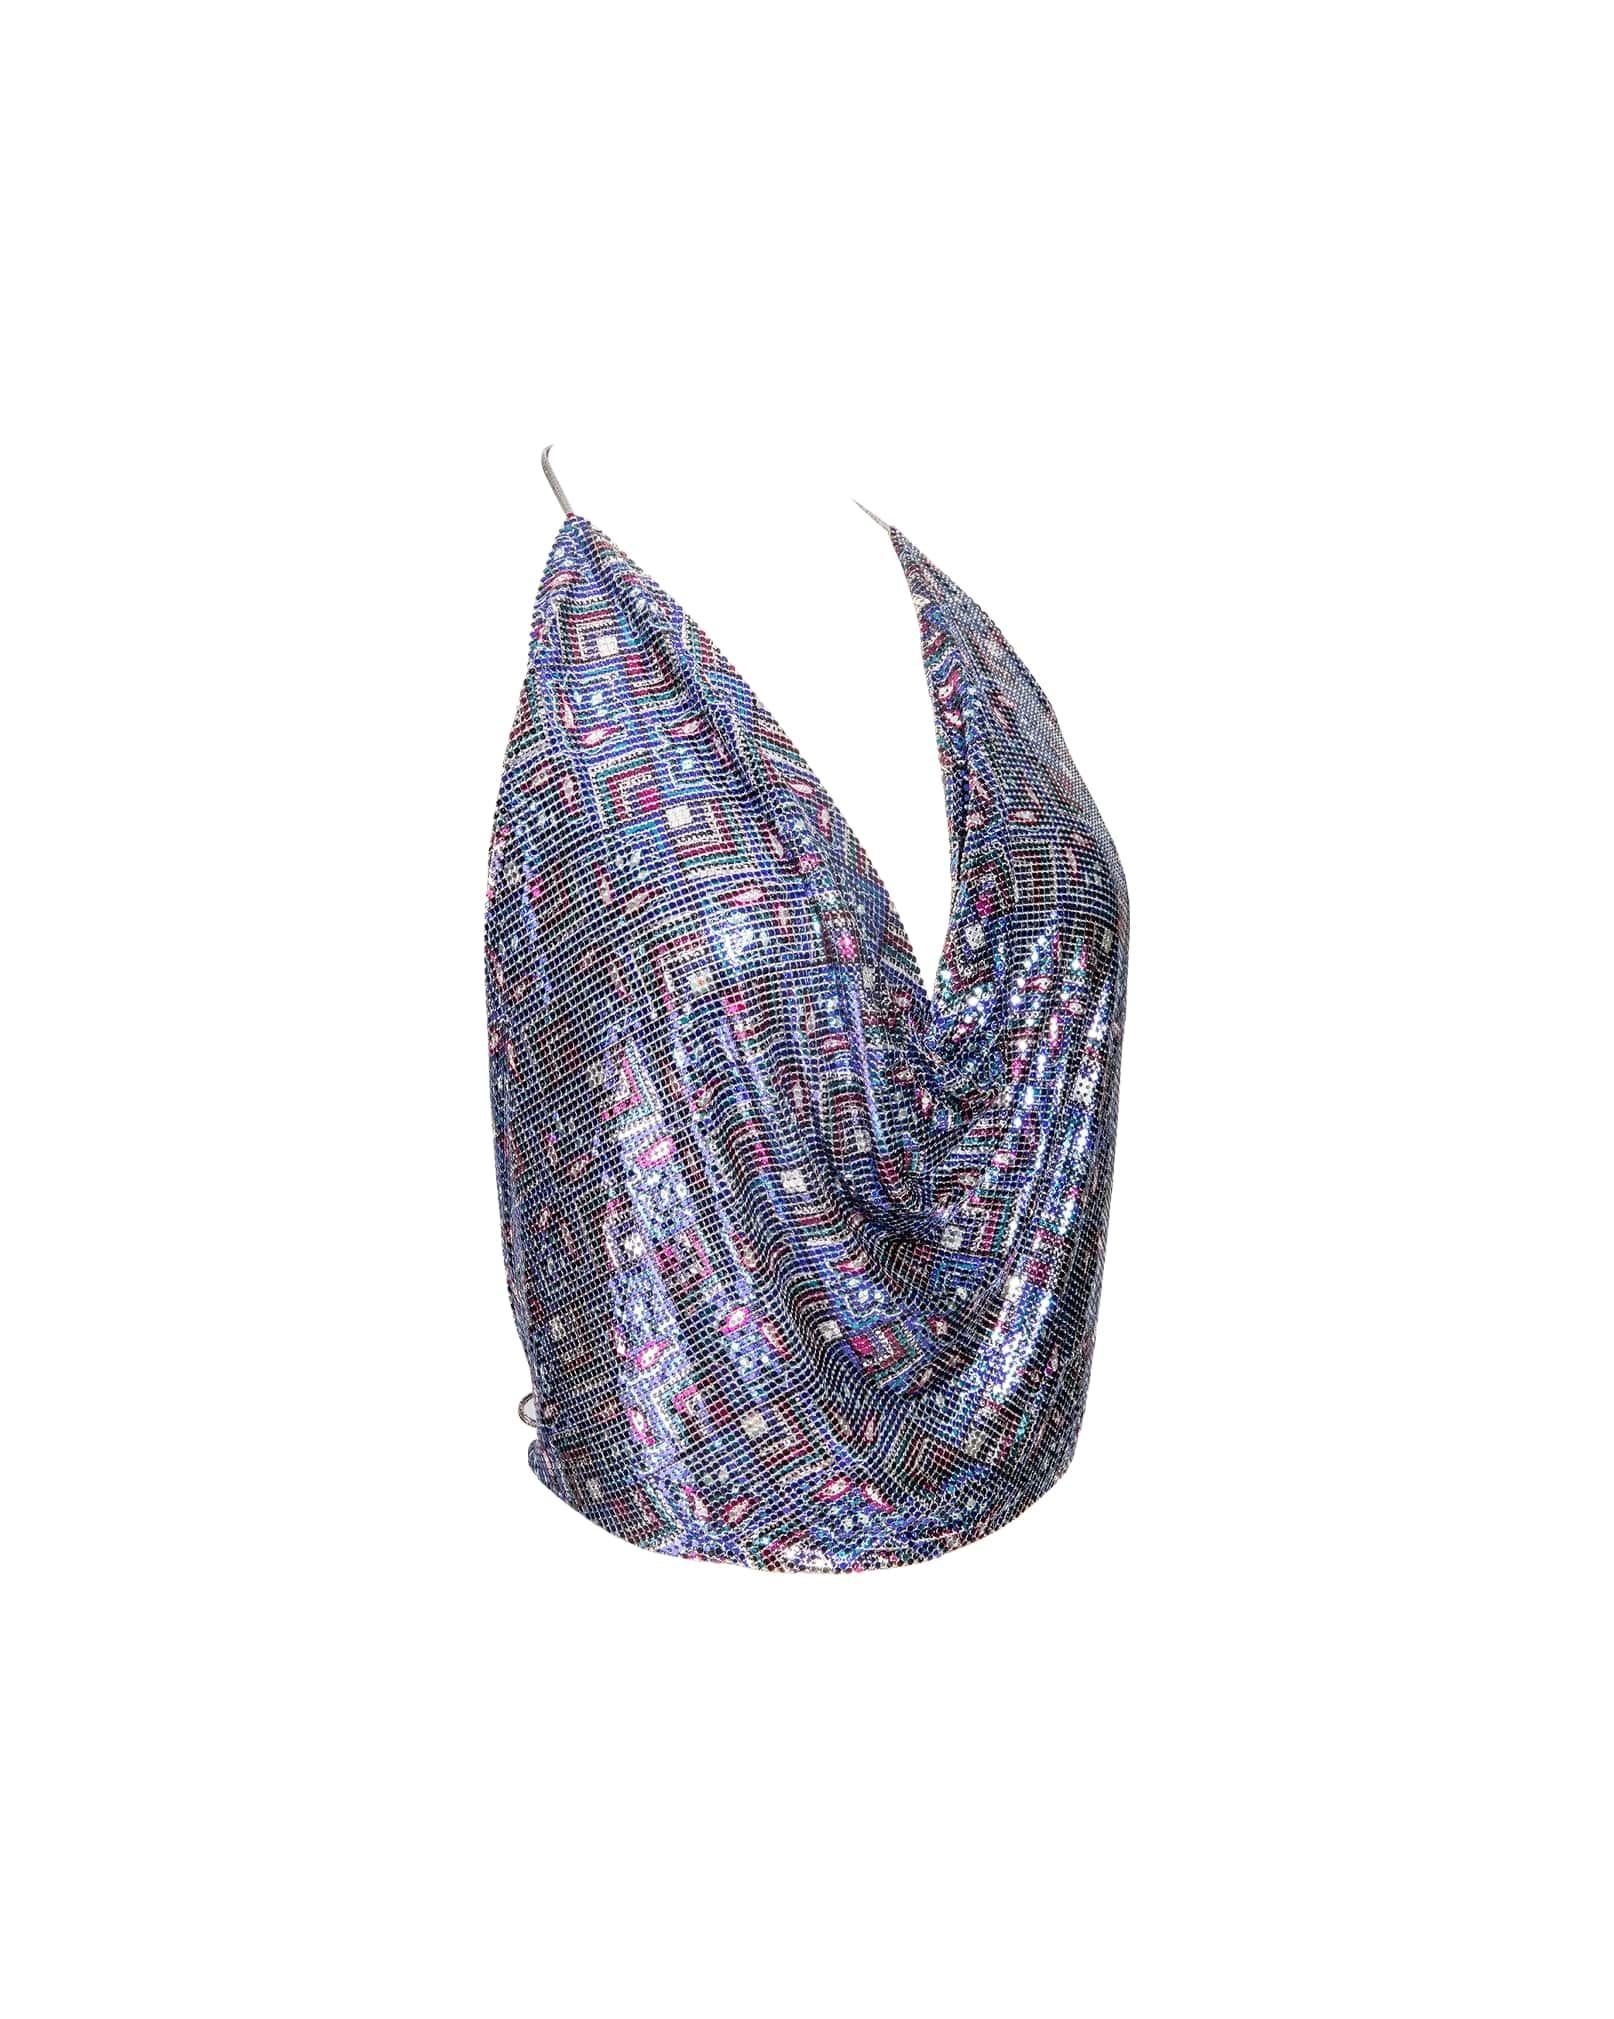 Women's Whiting and Davis Blue Patterned Chainmail Halter Top, 1970’s